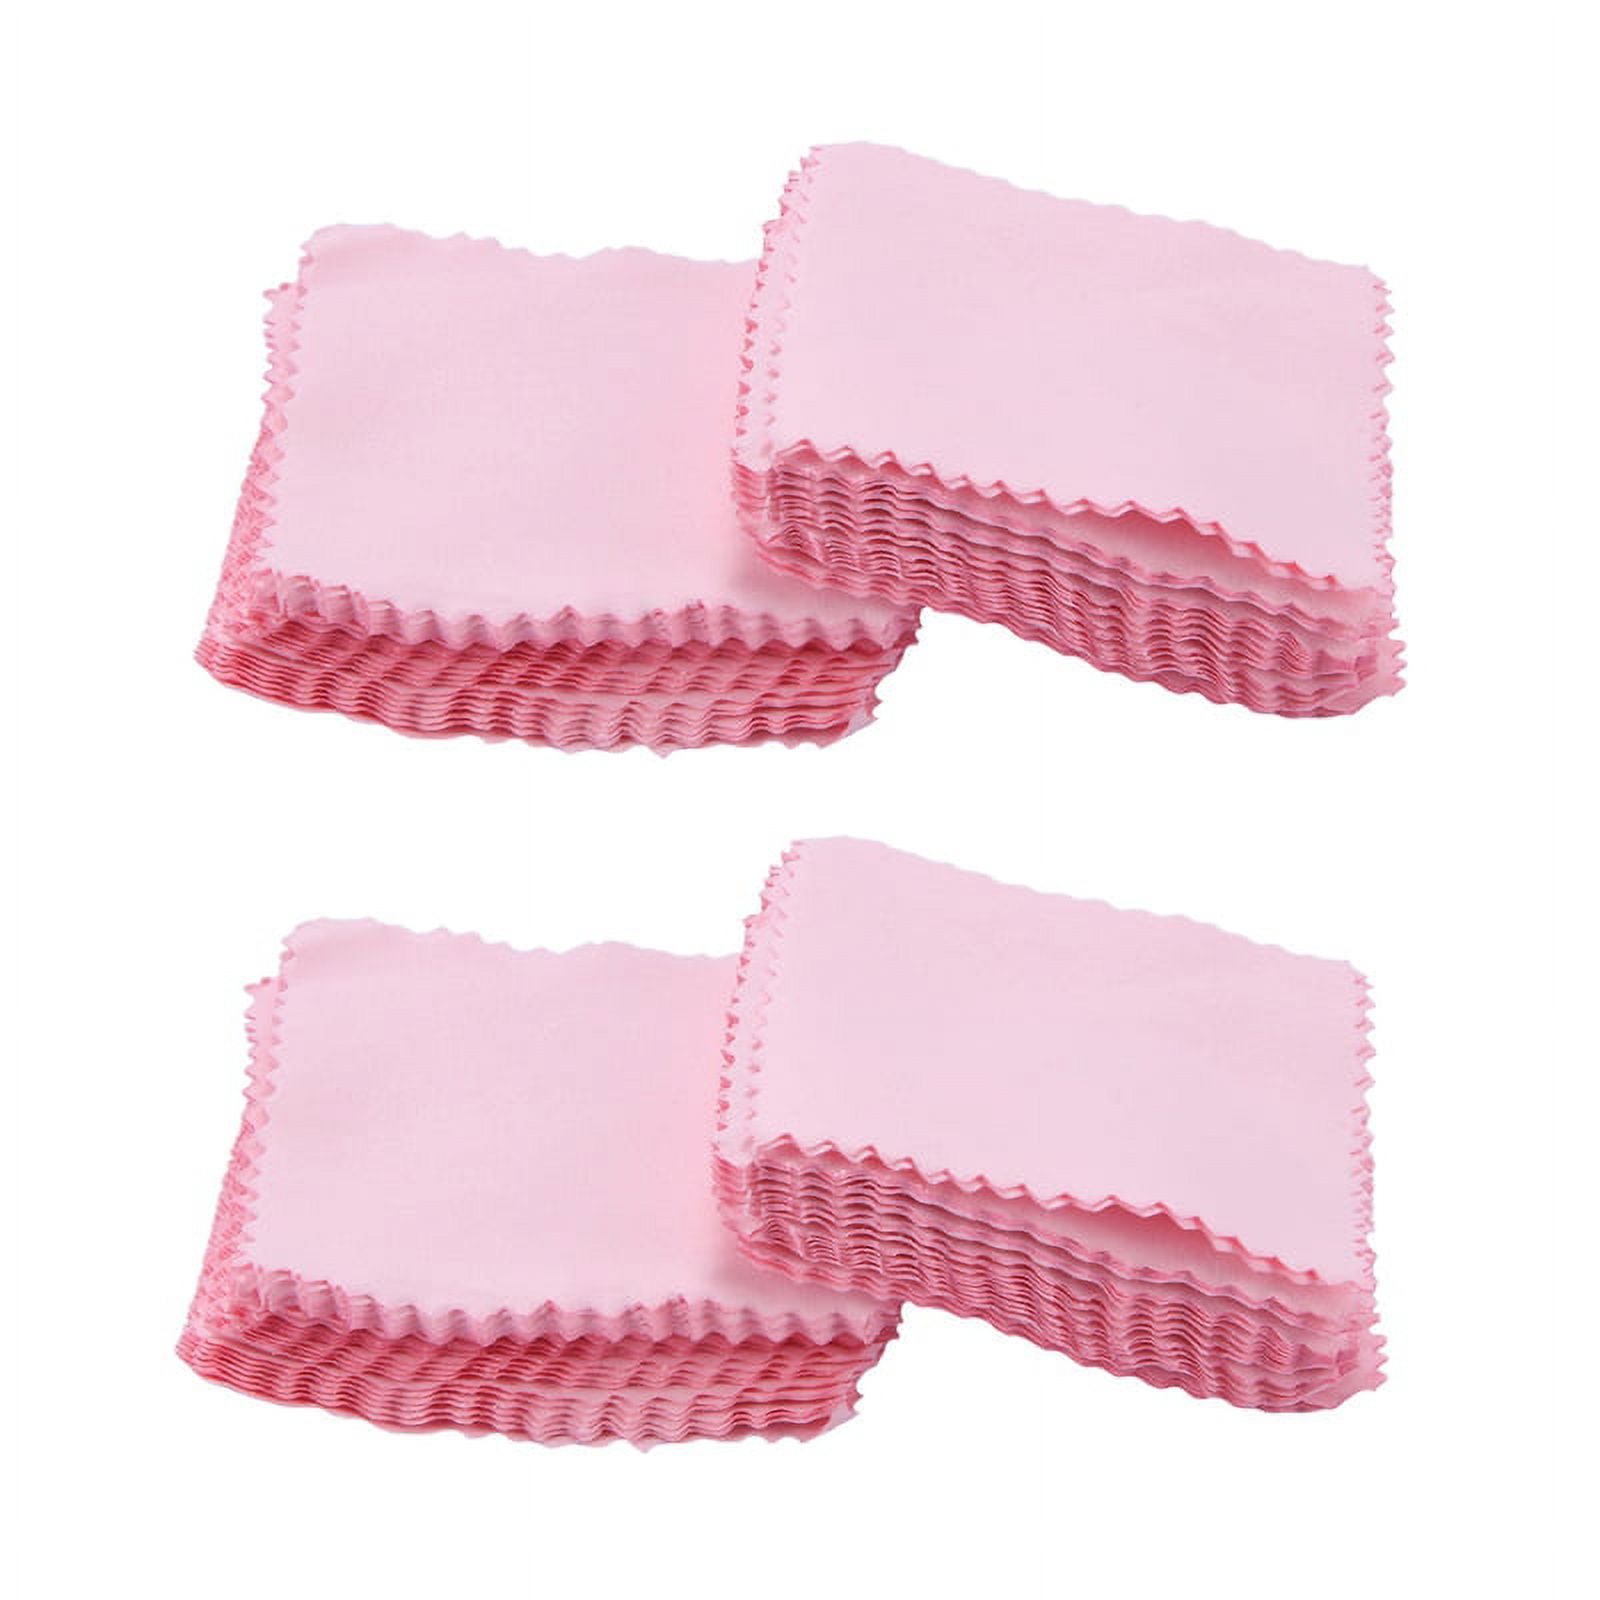 PINGMIC 120pcs Jewelry Cleaning Cloth, Professional Polishing Cloth Individually Wrapped, Pink Silver Polishing Cloth for Jewelry Sterling Silver